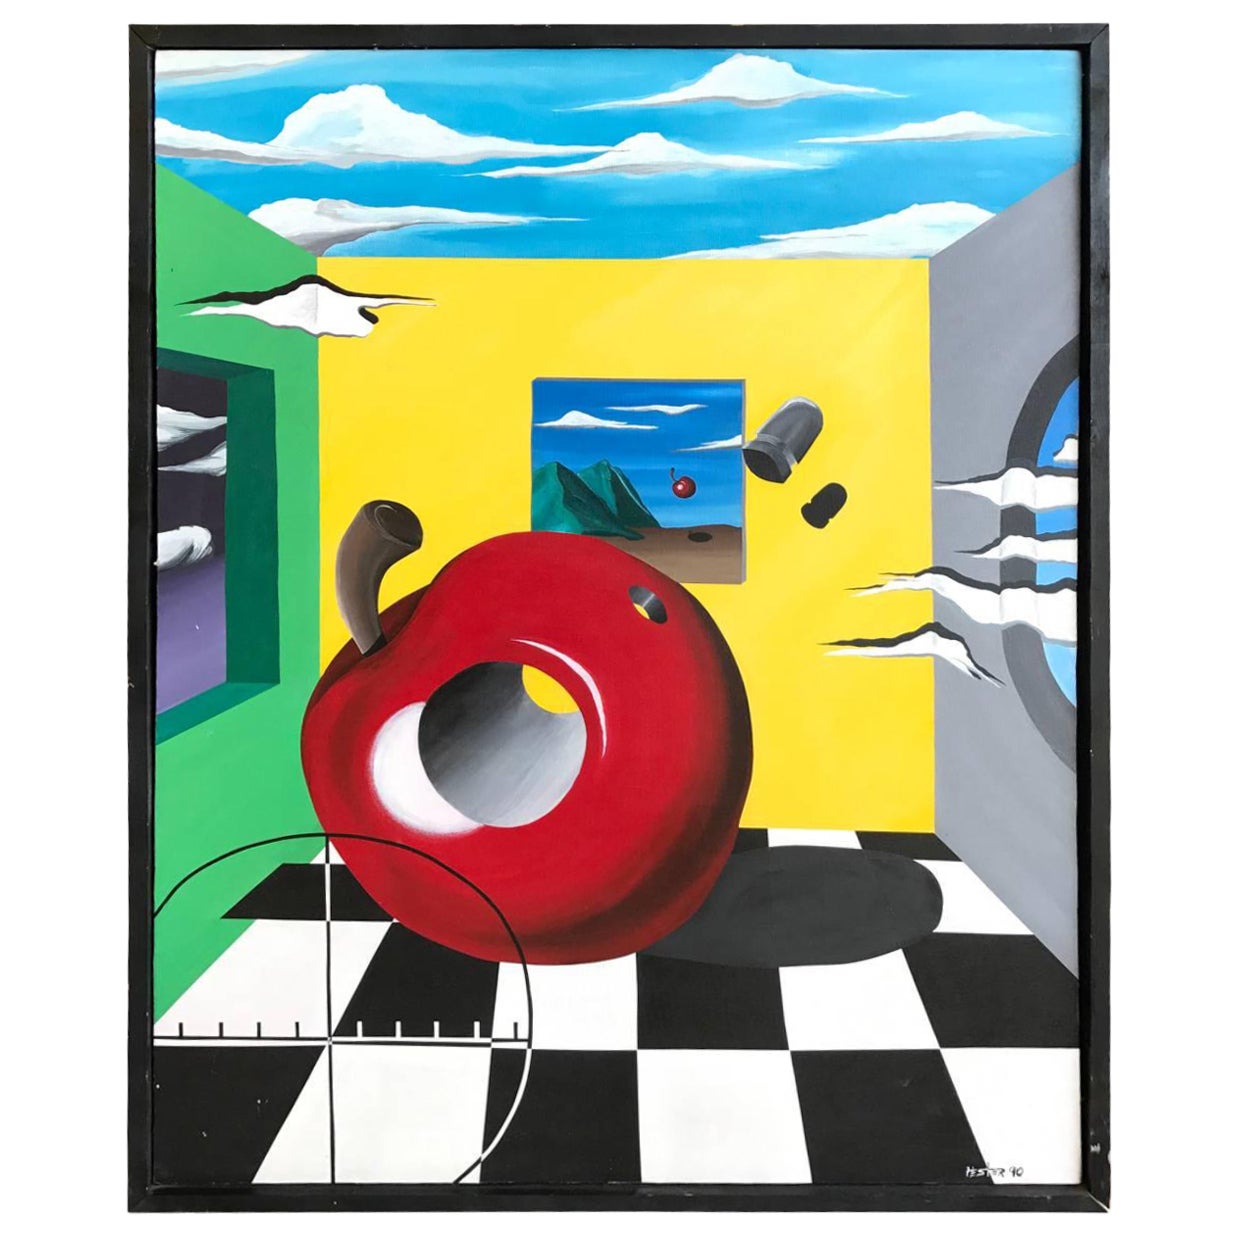 Oil On Canvas "The Apple", Acrylic on Canvas, Signed Hester, 1990